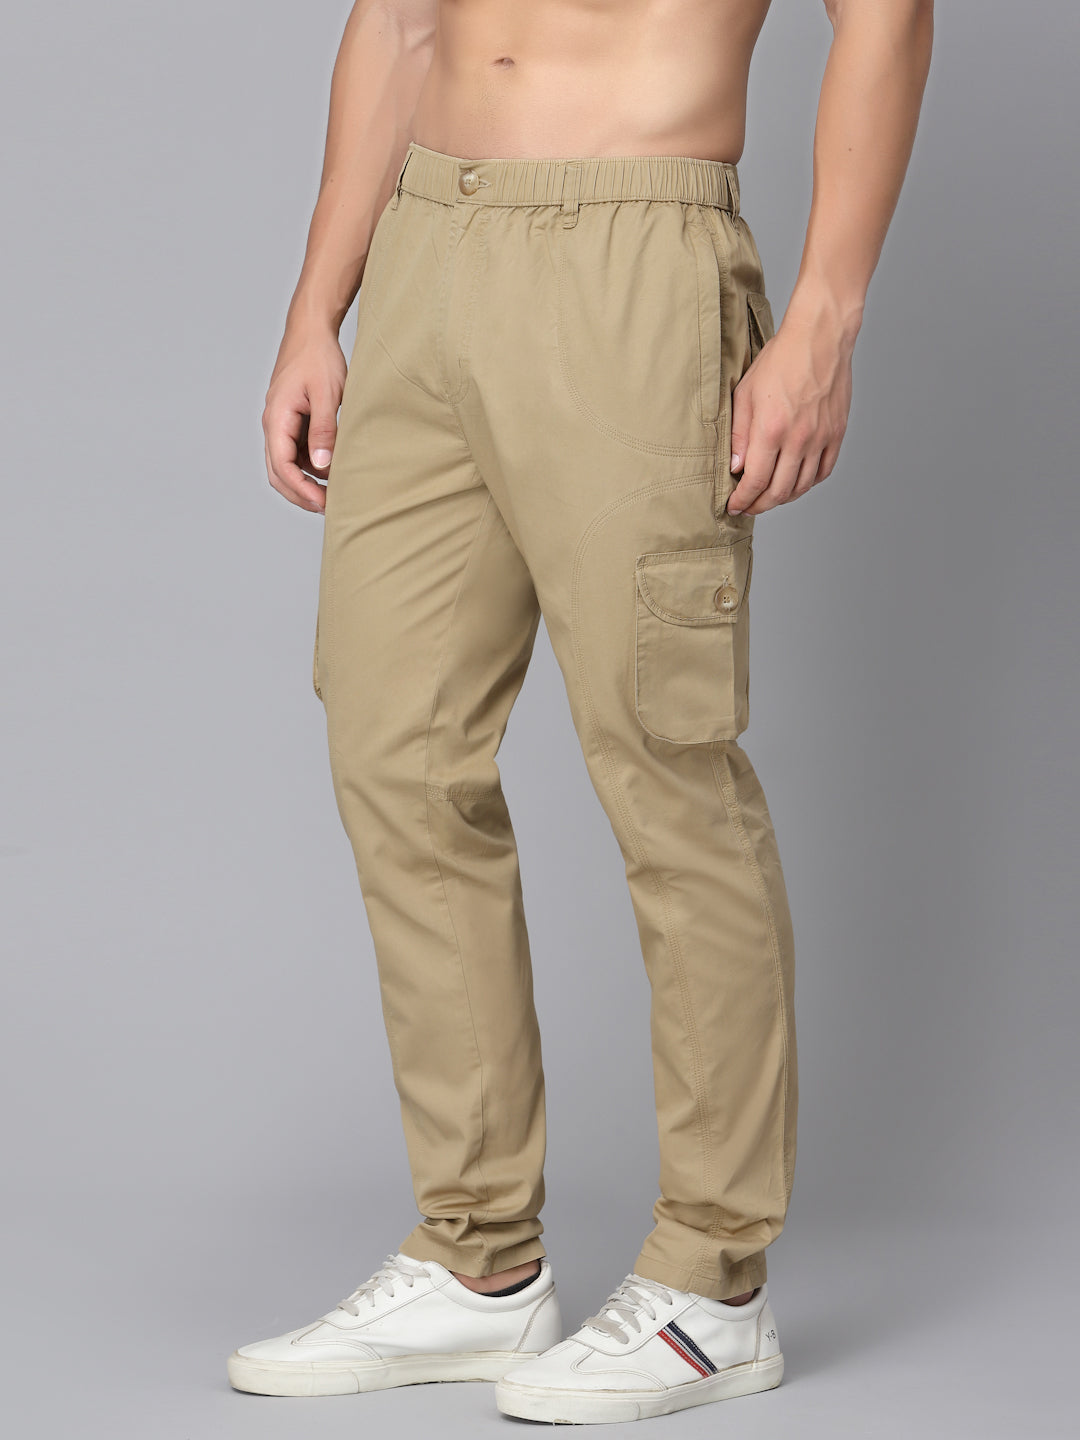 6 Pocket Cargo Trousers in all Colors - Cargo Trouser- Mens Trousers â€“Mb  Sons 001